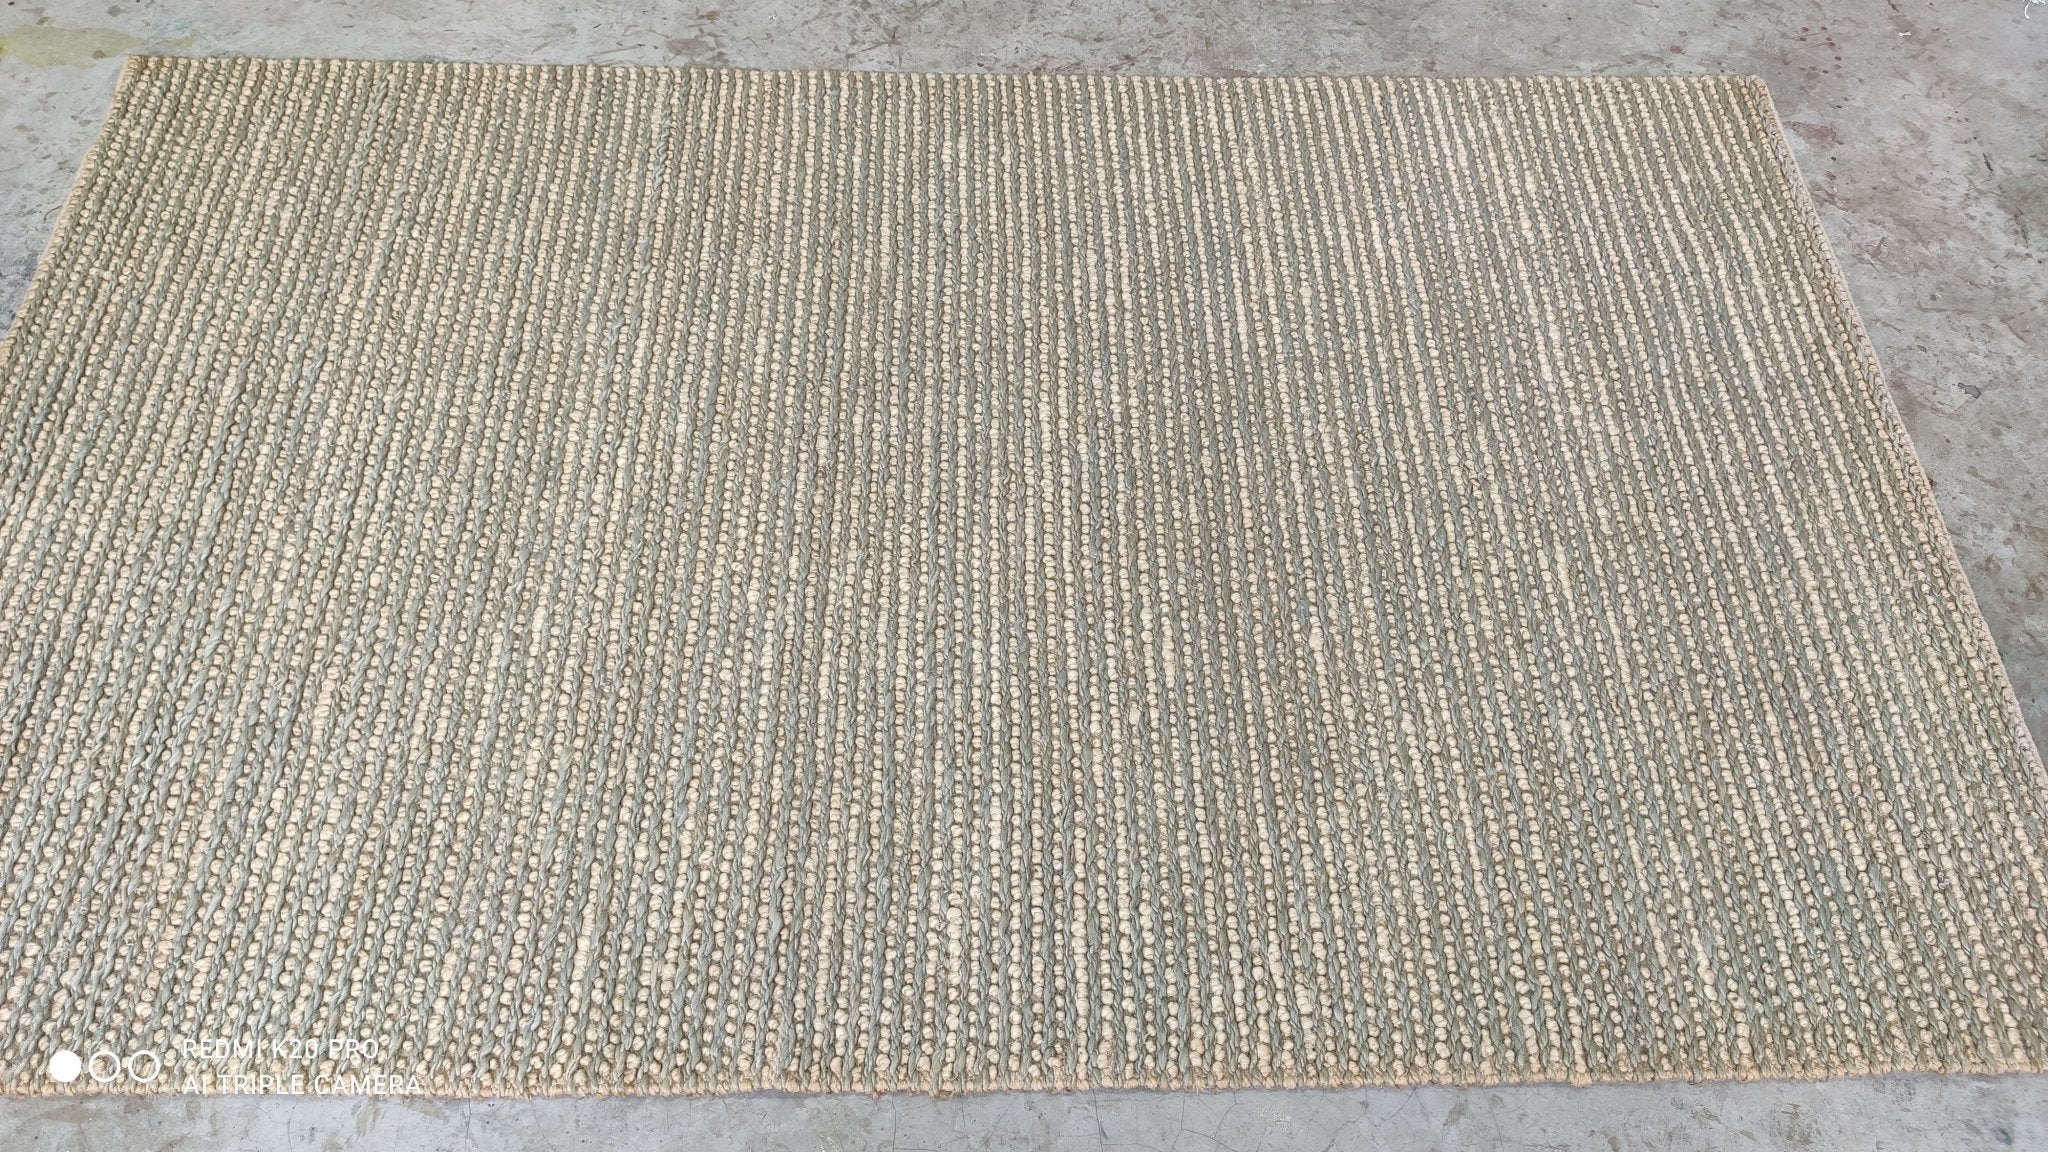 Tom Tuttle from Tacoma 5x8 Handwoven Natural and Grey Striped Jute Rug | Banana Manor Rug Company